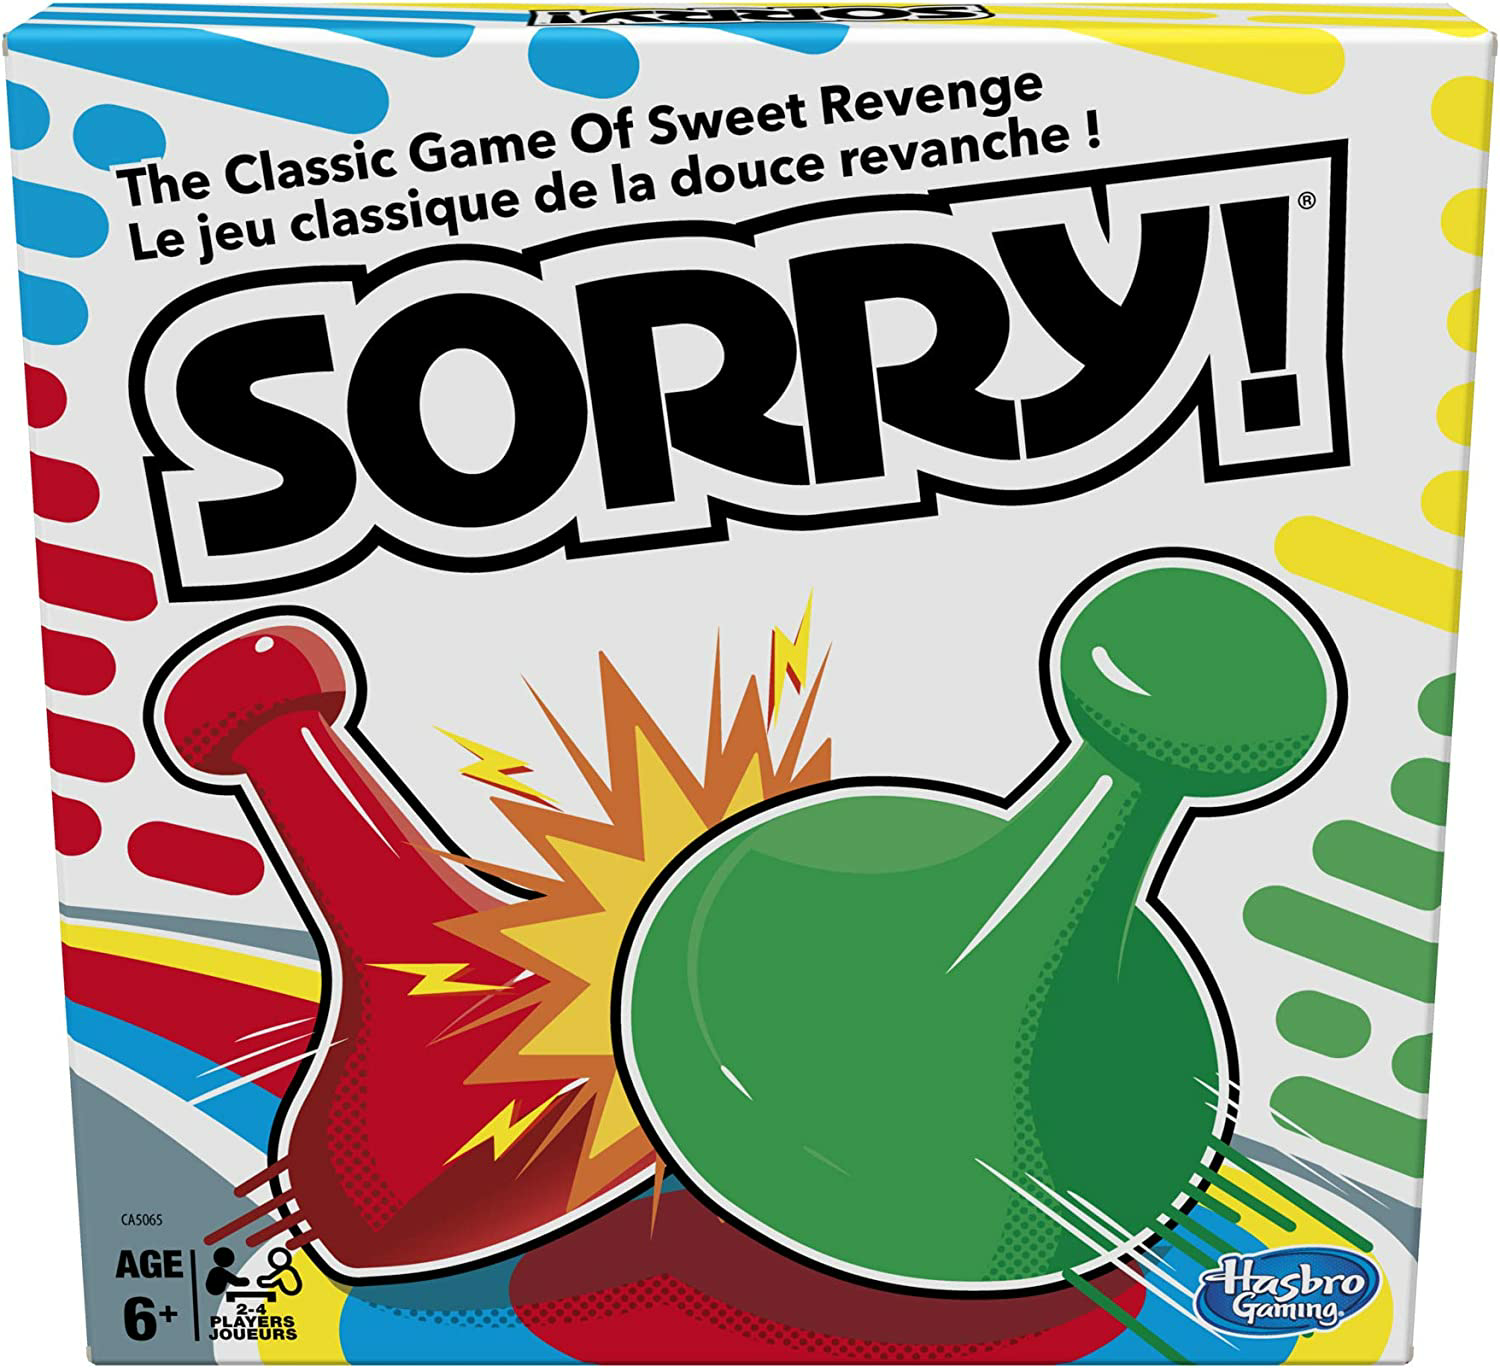 Sorry! Game $4.99